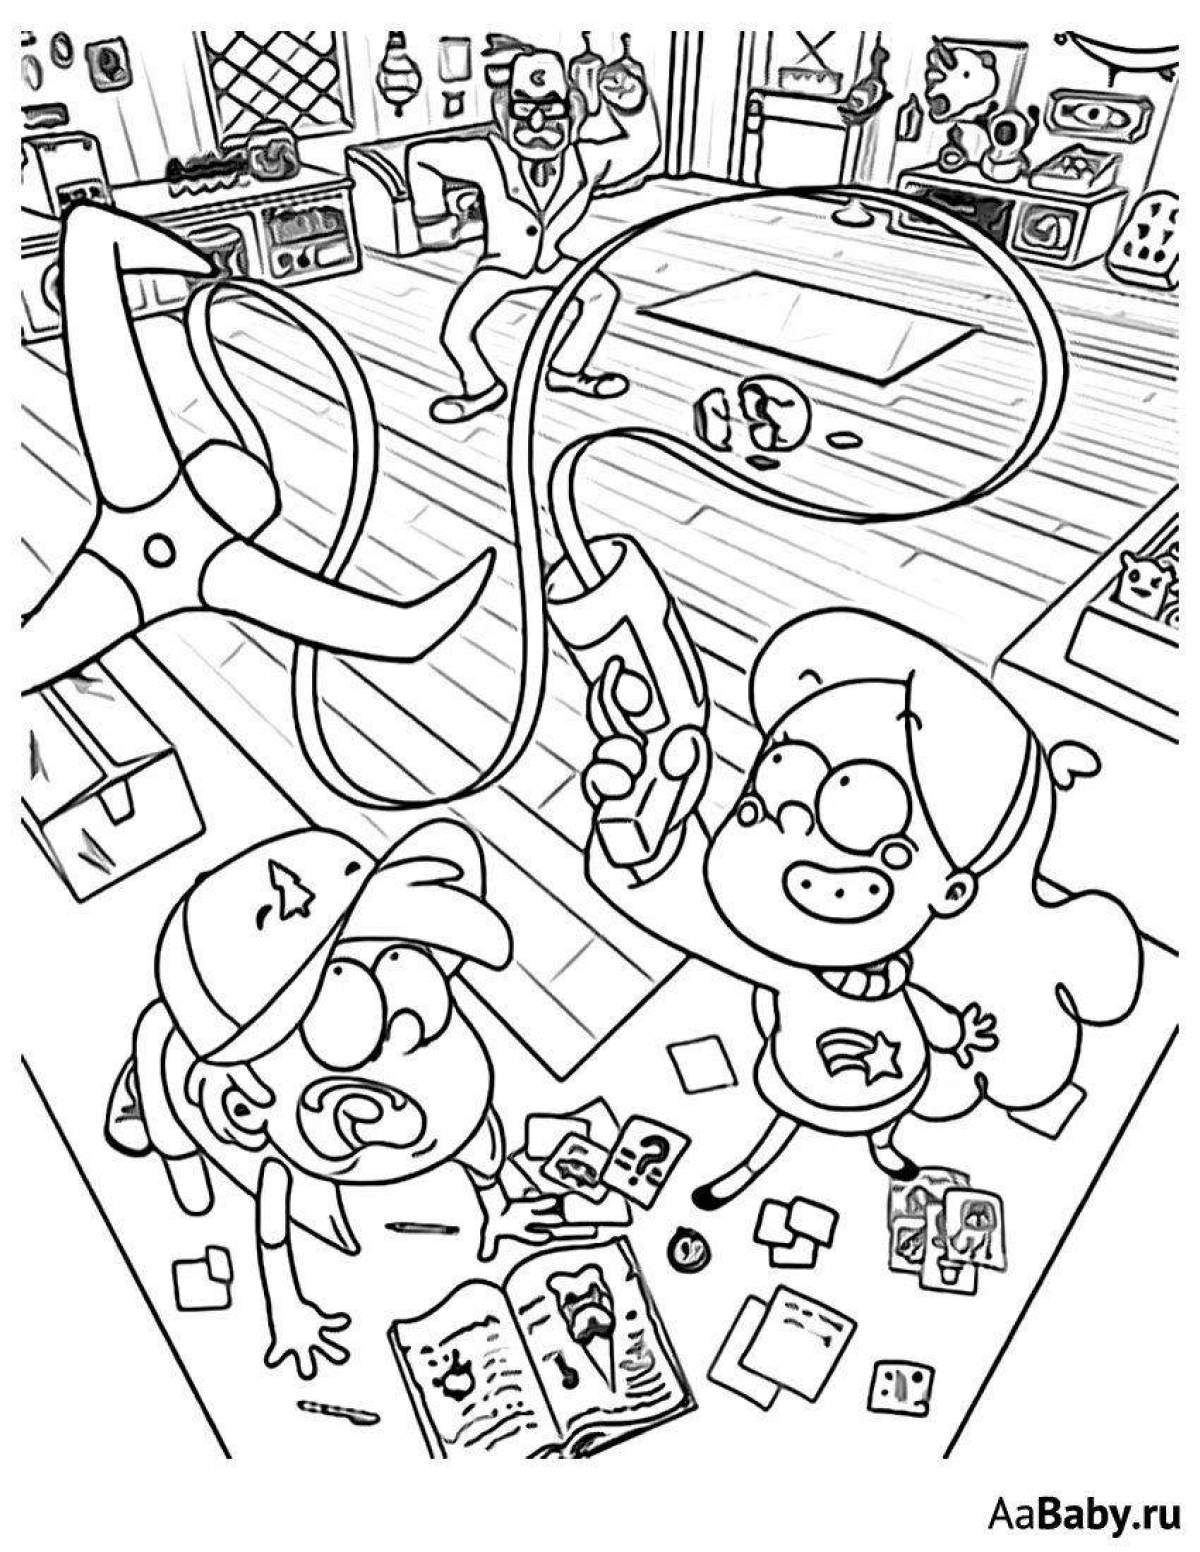 Colorful coloring pages dipper and mabel